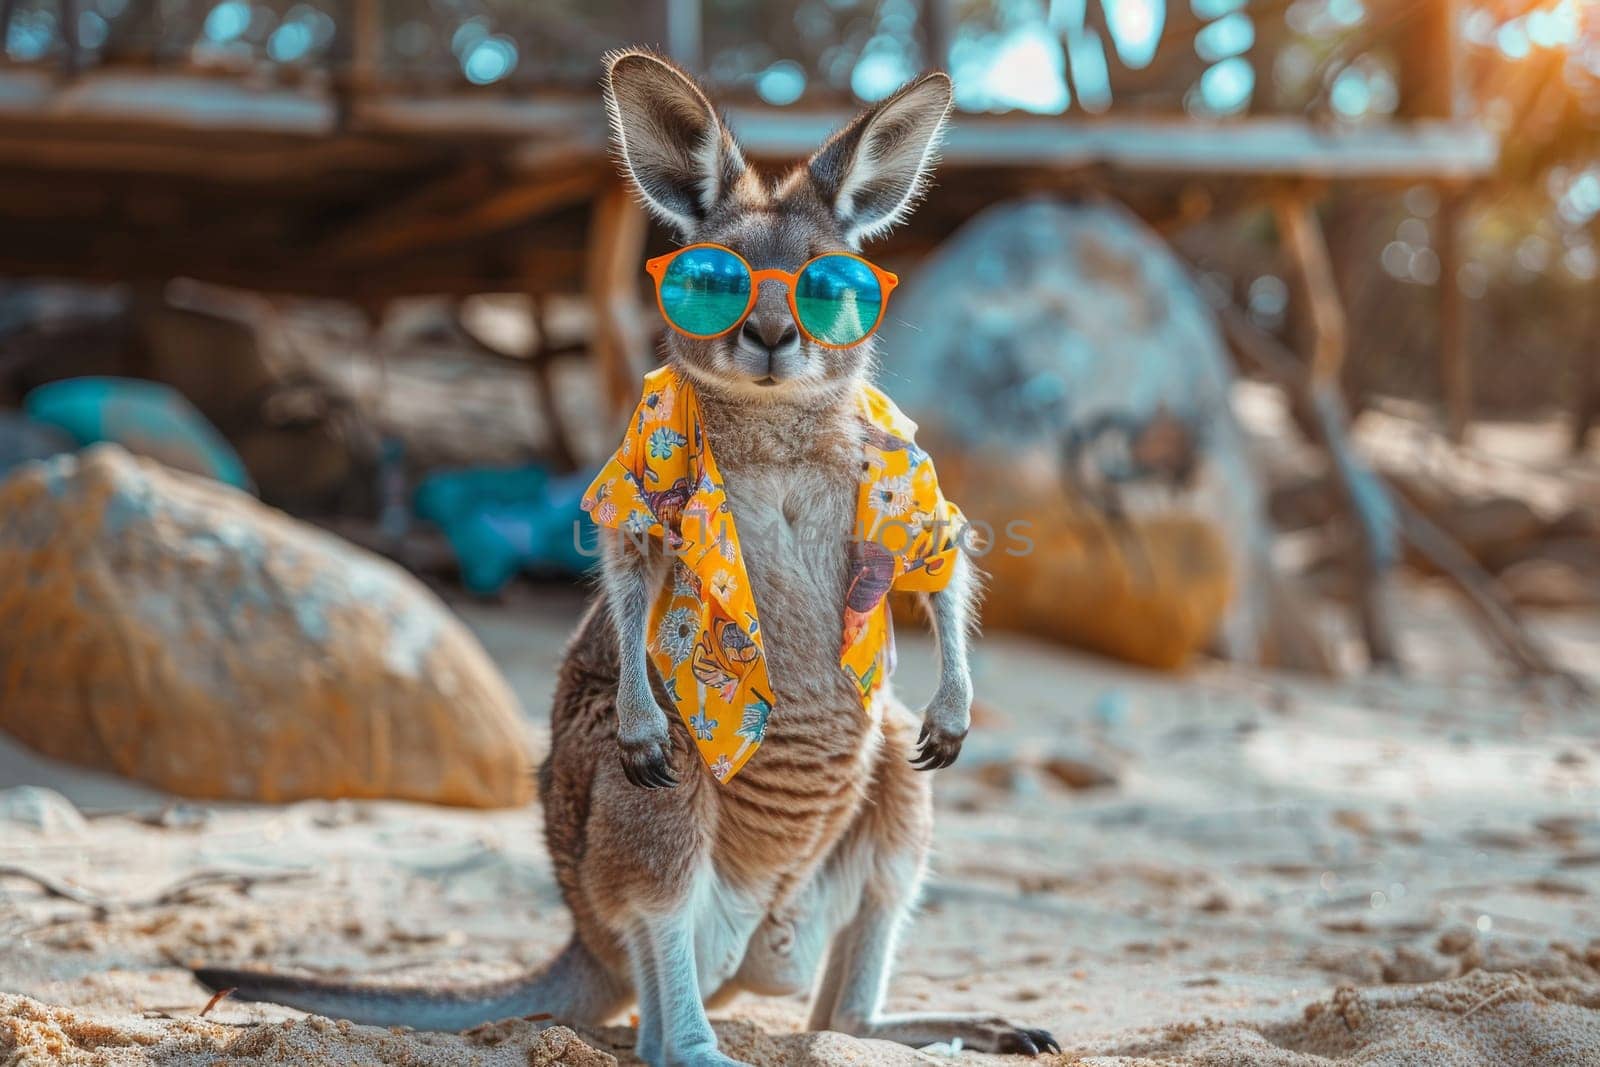 A kangaroo wearing sunglasses and a Hawaiian shirt is standing on a beach by itchaznong